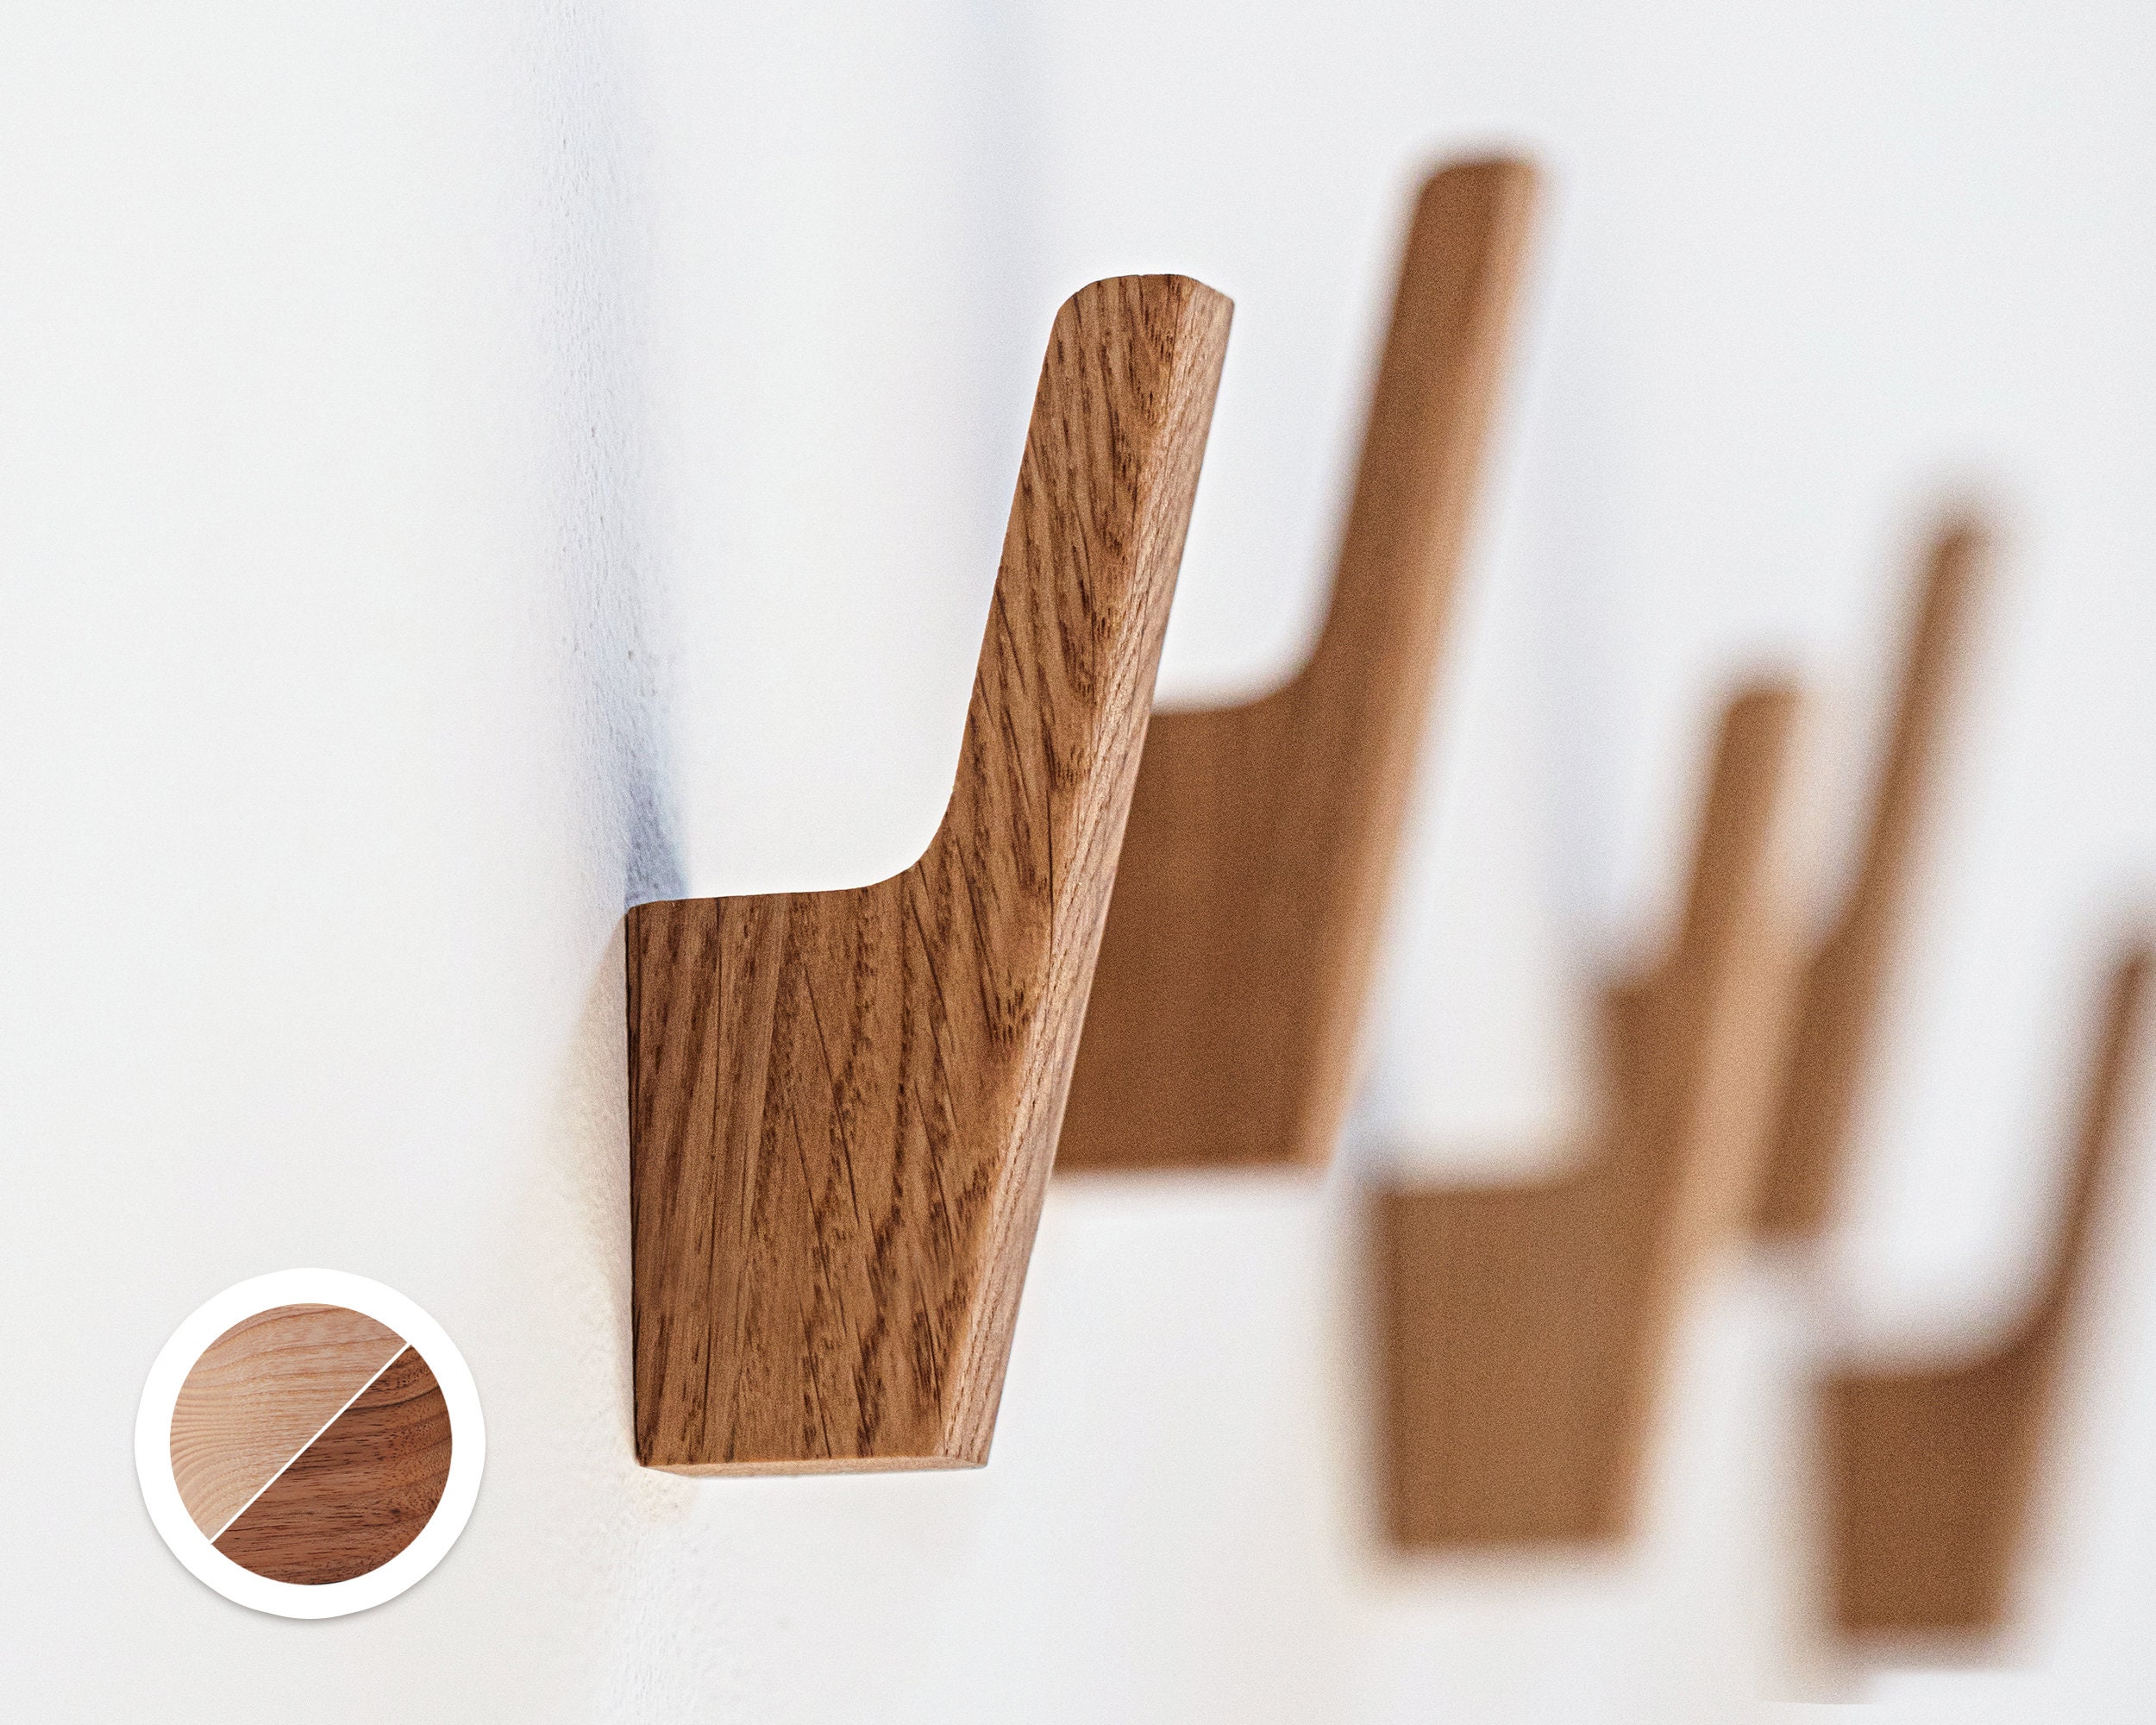 Wall Peg single & Set of 3 or 5 by TOMAZIN Coat Hook, Wooden Wall